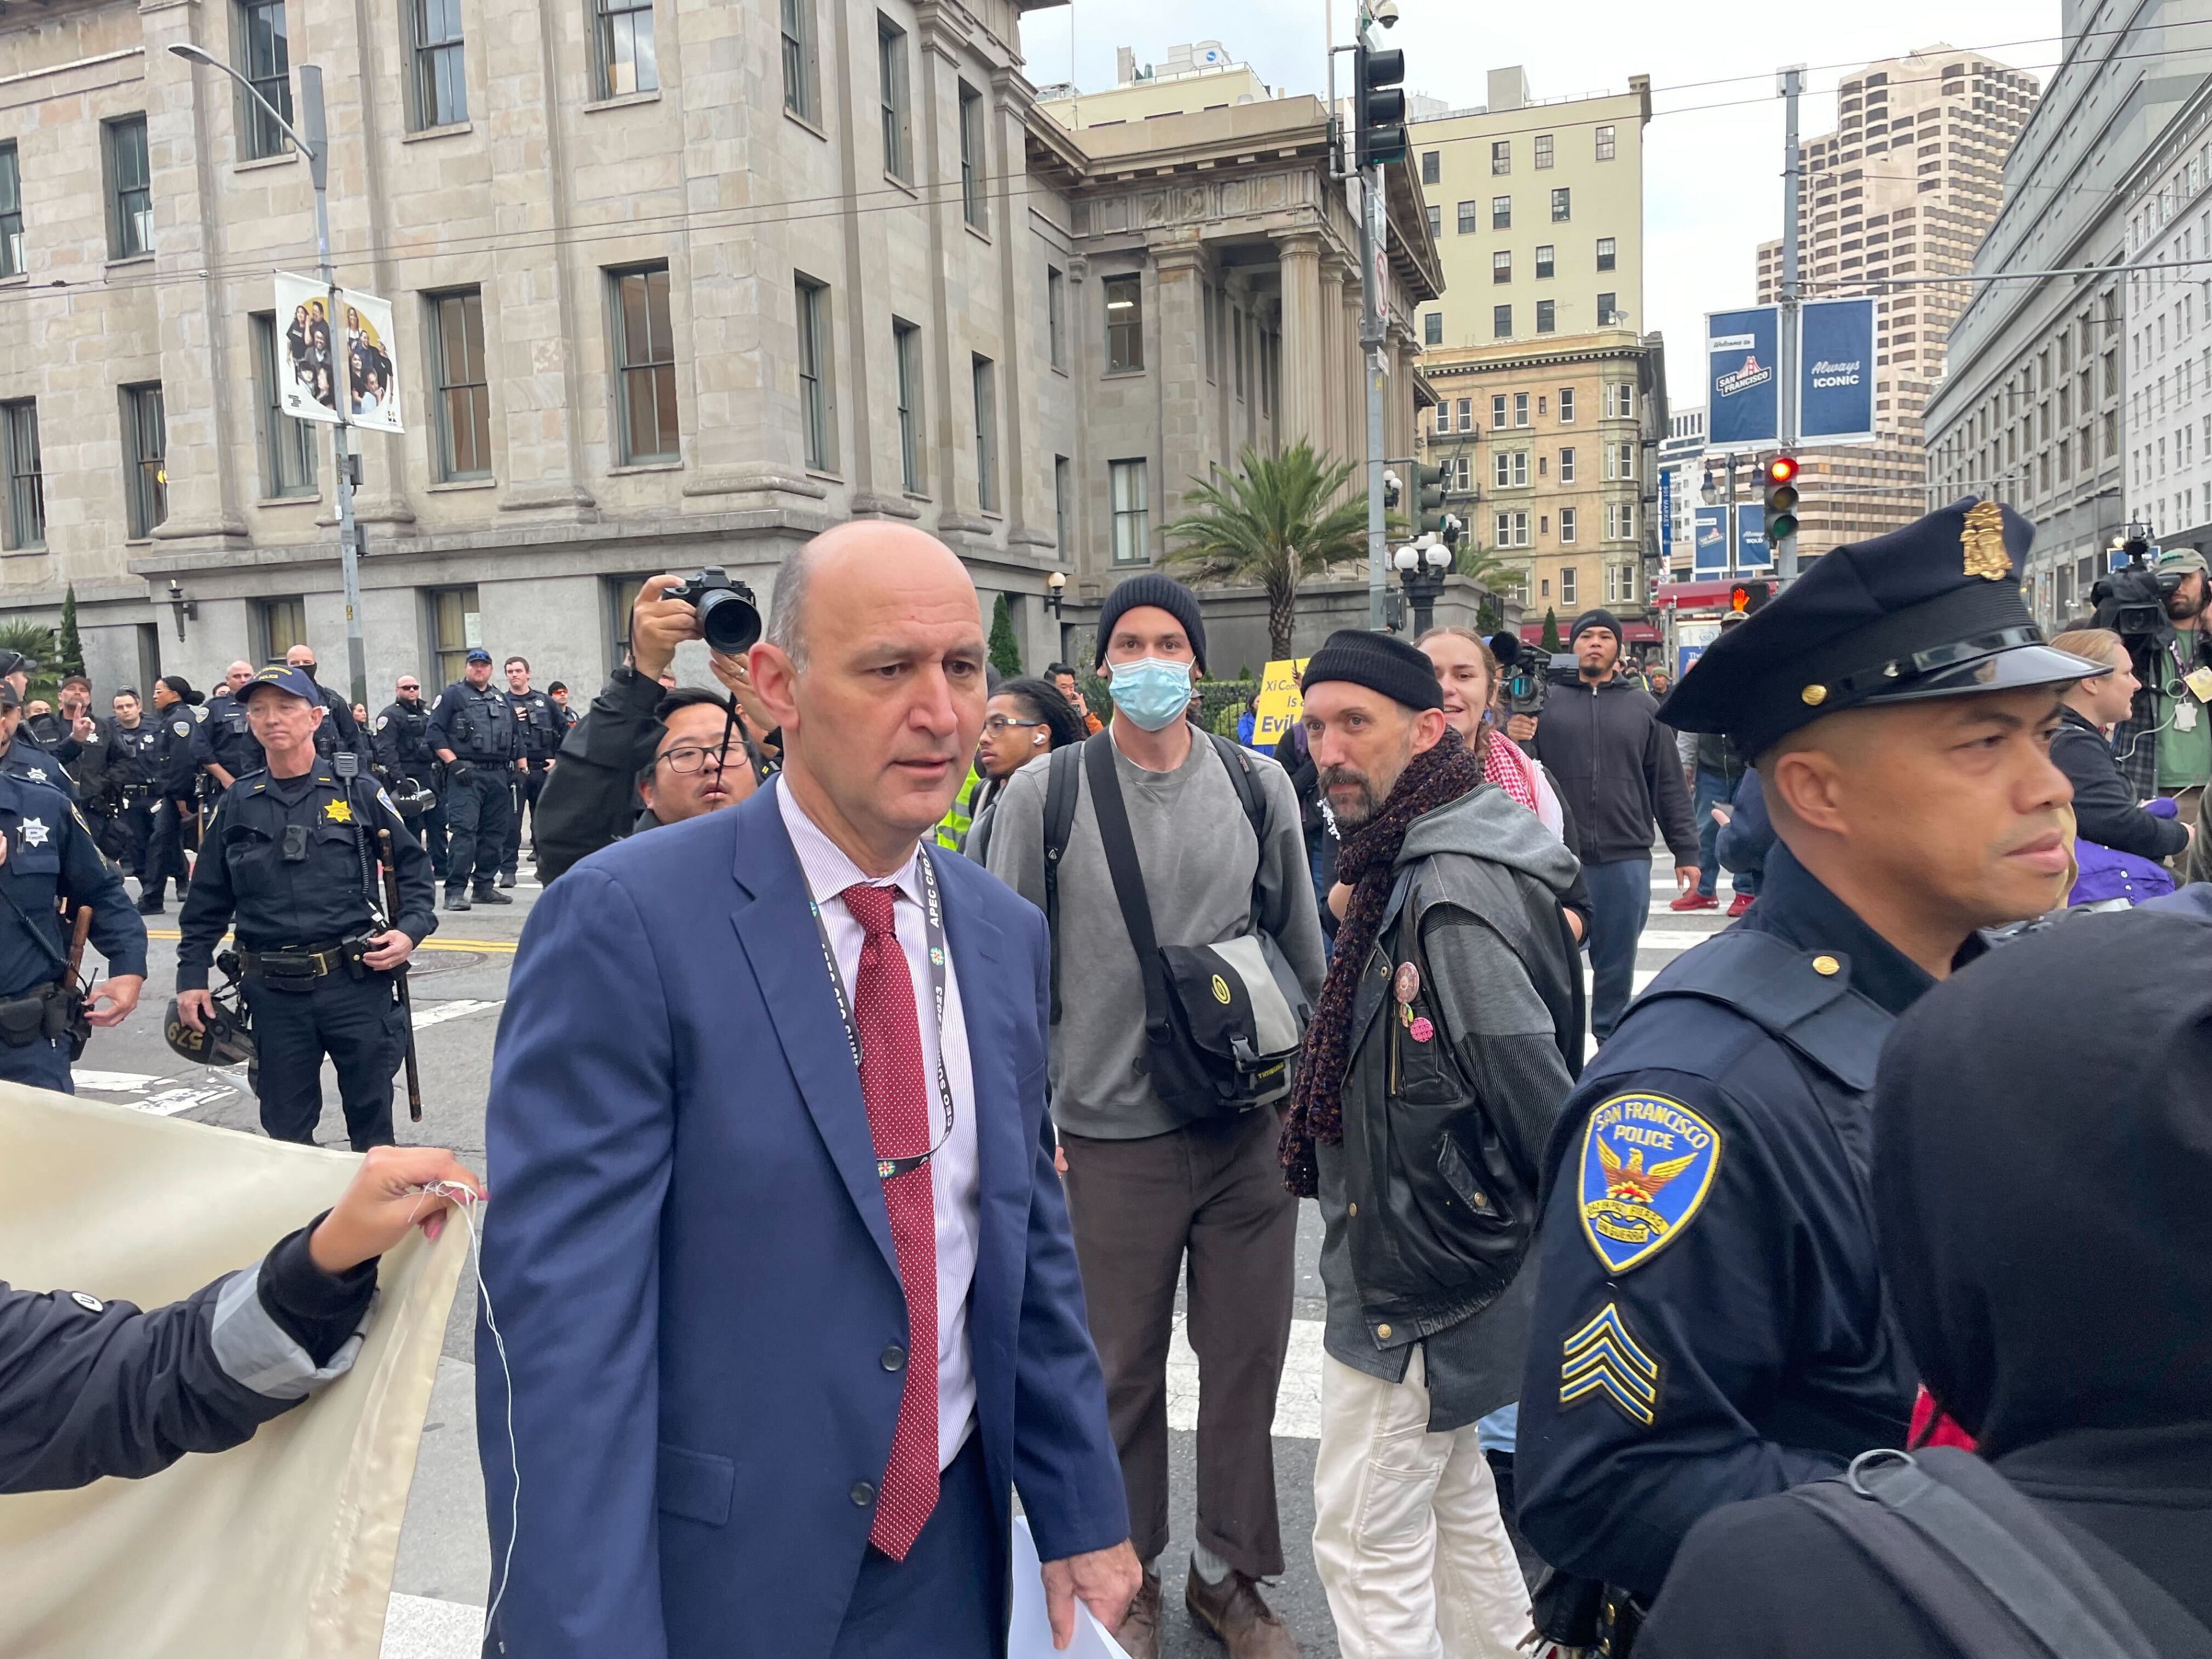 A shaven-headed suit-wearing man threads his way past uniformed police officers and a few protesters on a street corner.